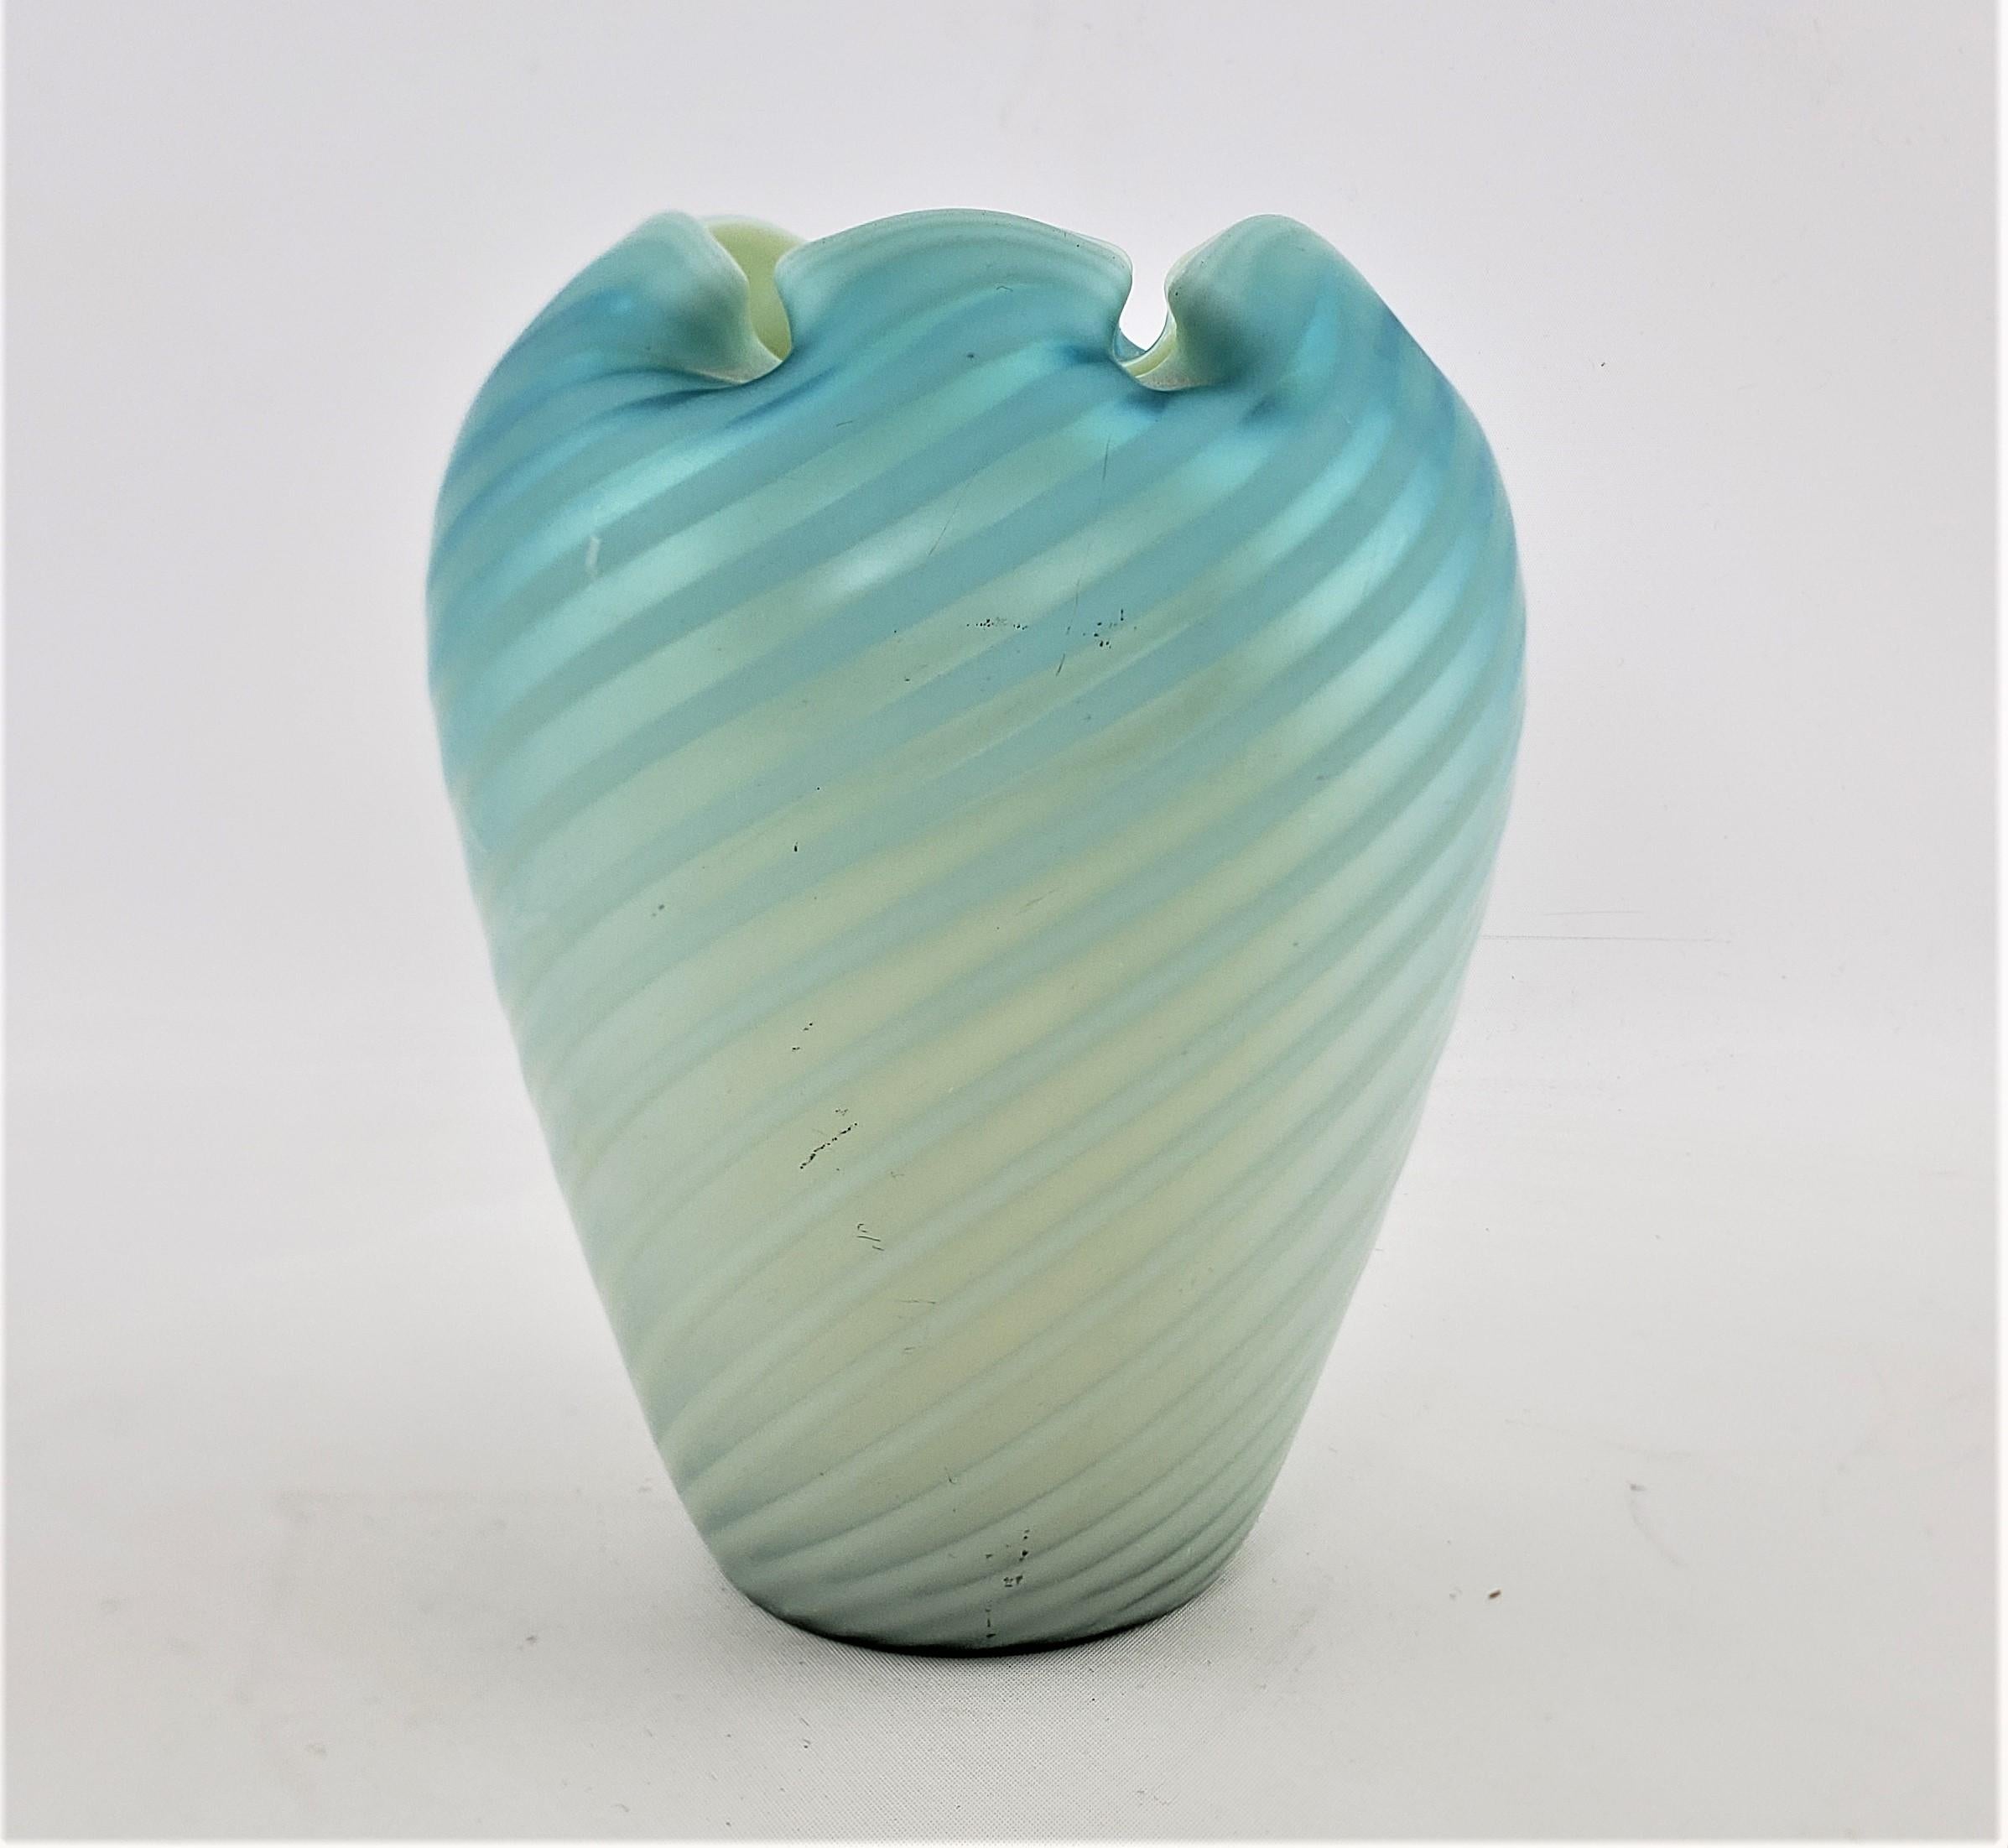 This antique and quite well executed art glass vase is unsigned, but presumed to have originated from the United States and dating to approximately 1880 and done in a period Victorian style. The vase is done in a deep blue with a strong iridescence